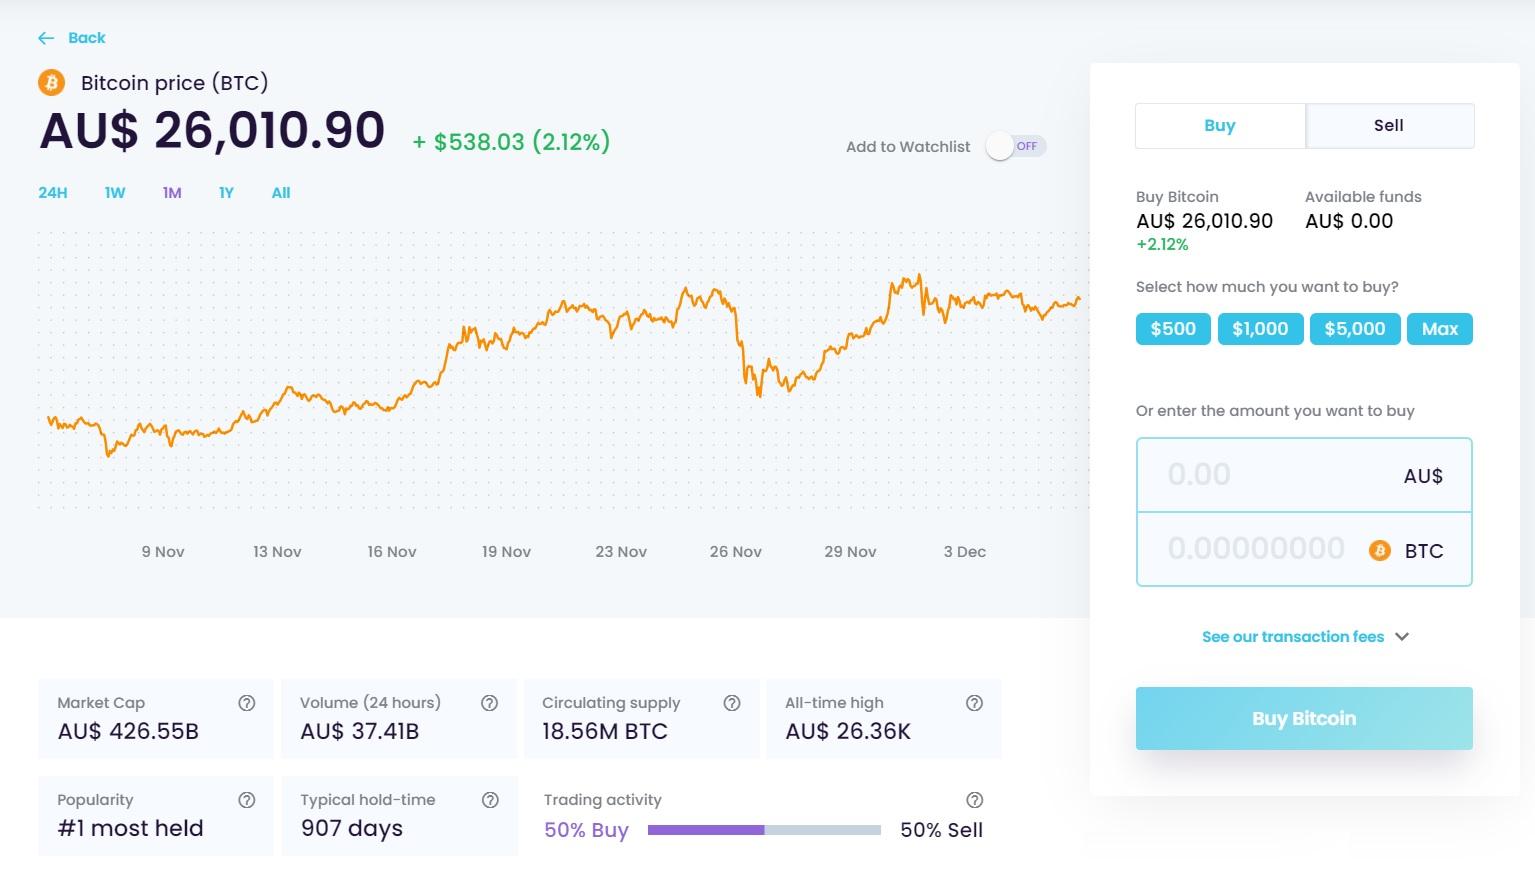 digital surge dashboard for buying crypto with AUD